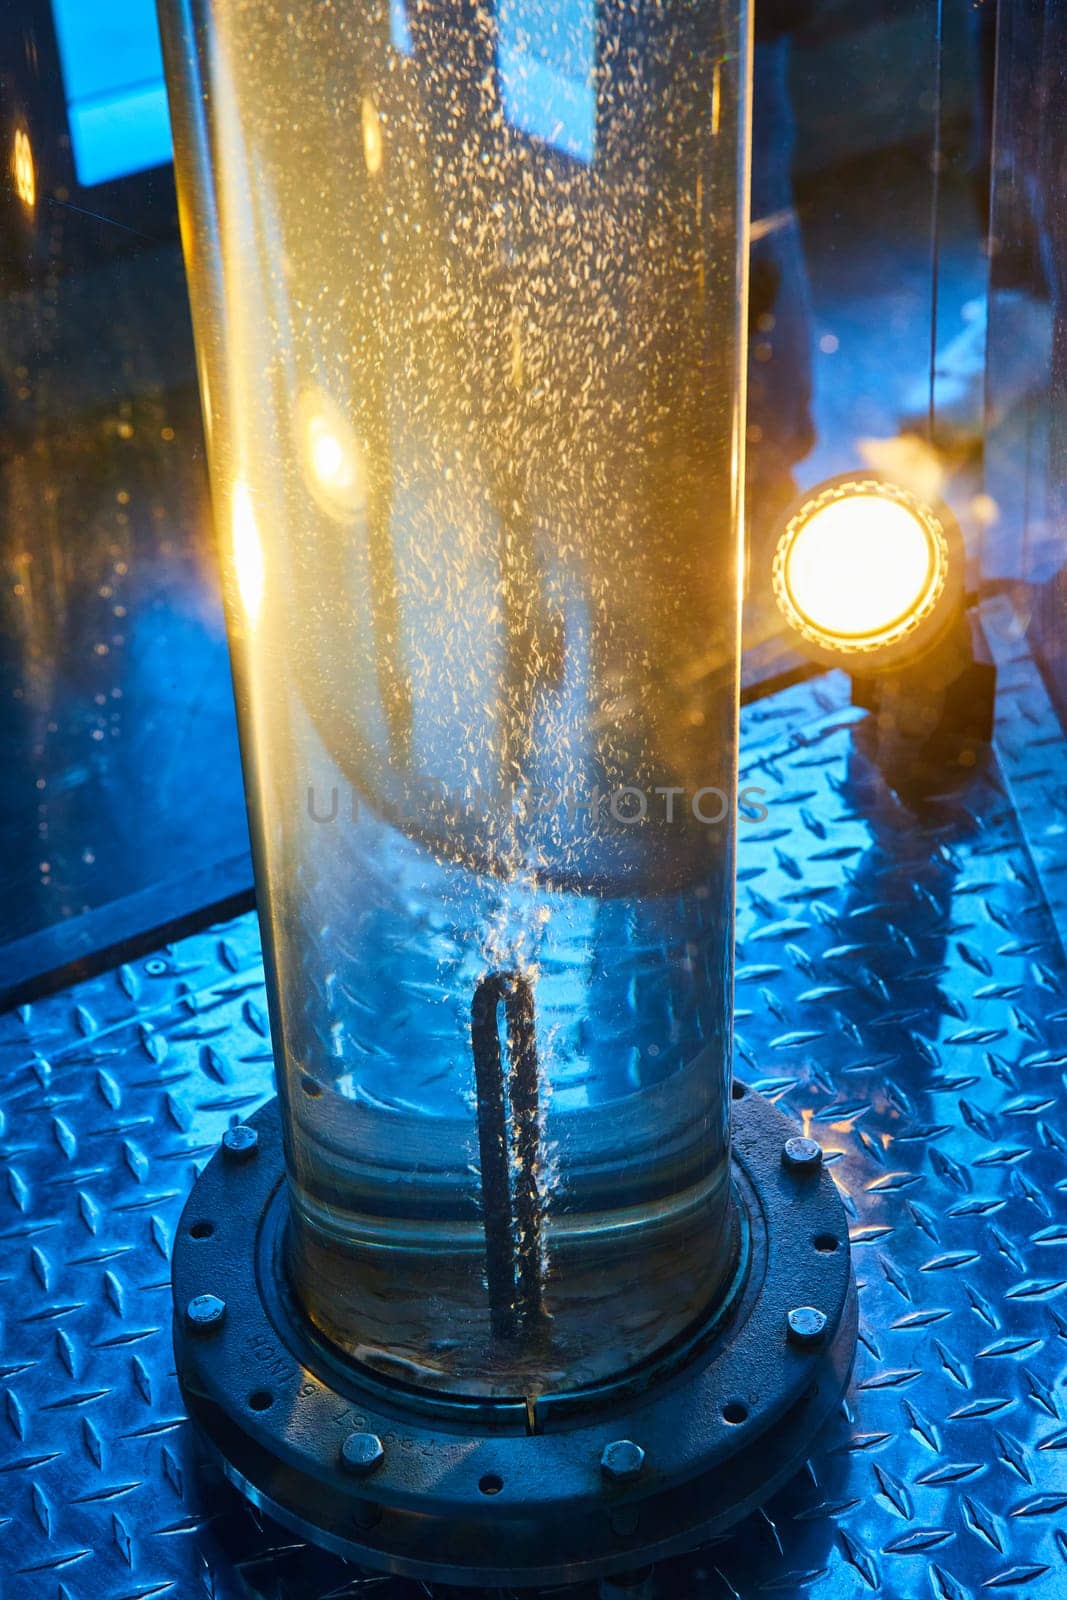 Image of Water in clear tube on metal plate with light illuminating bubbles as they rise